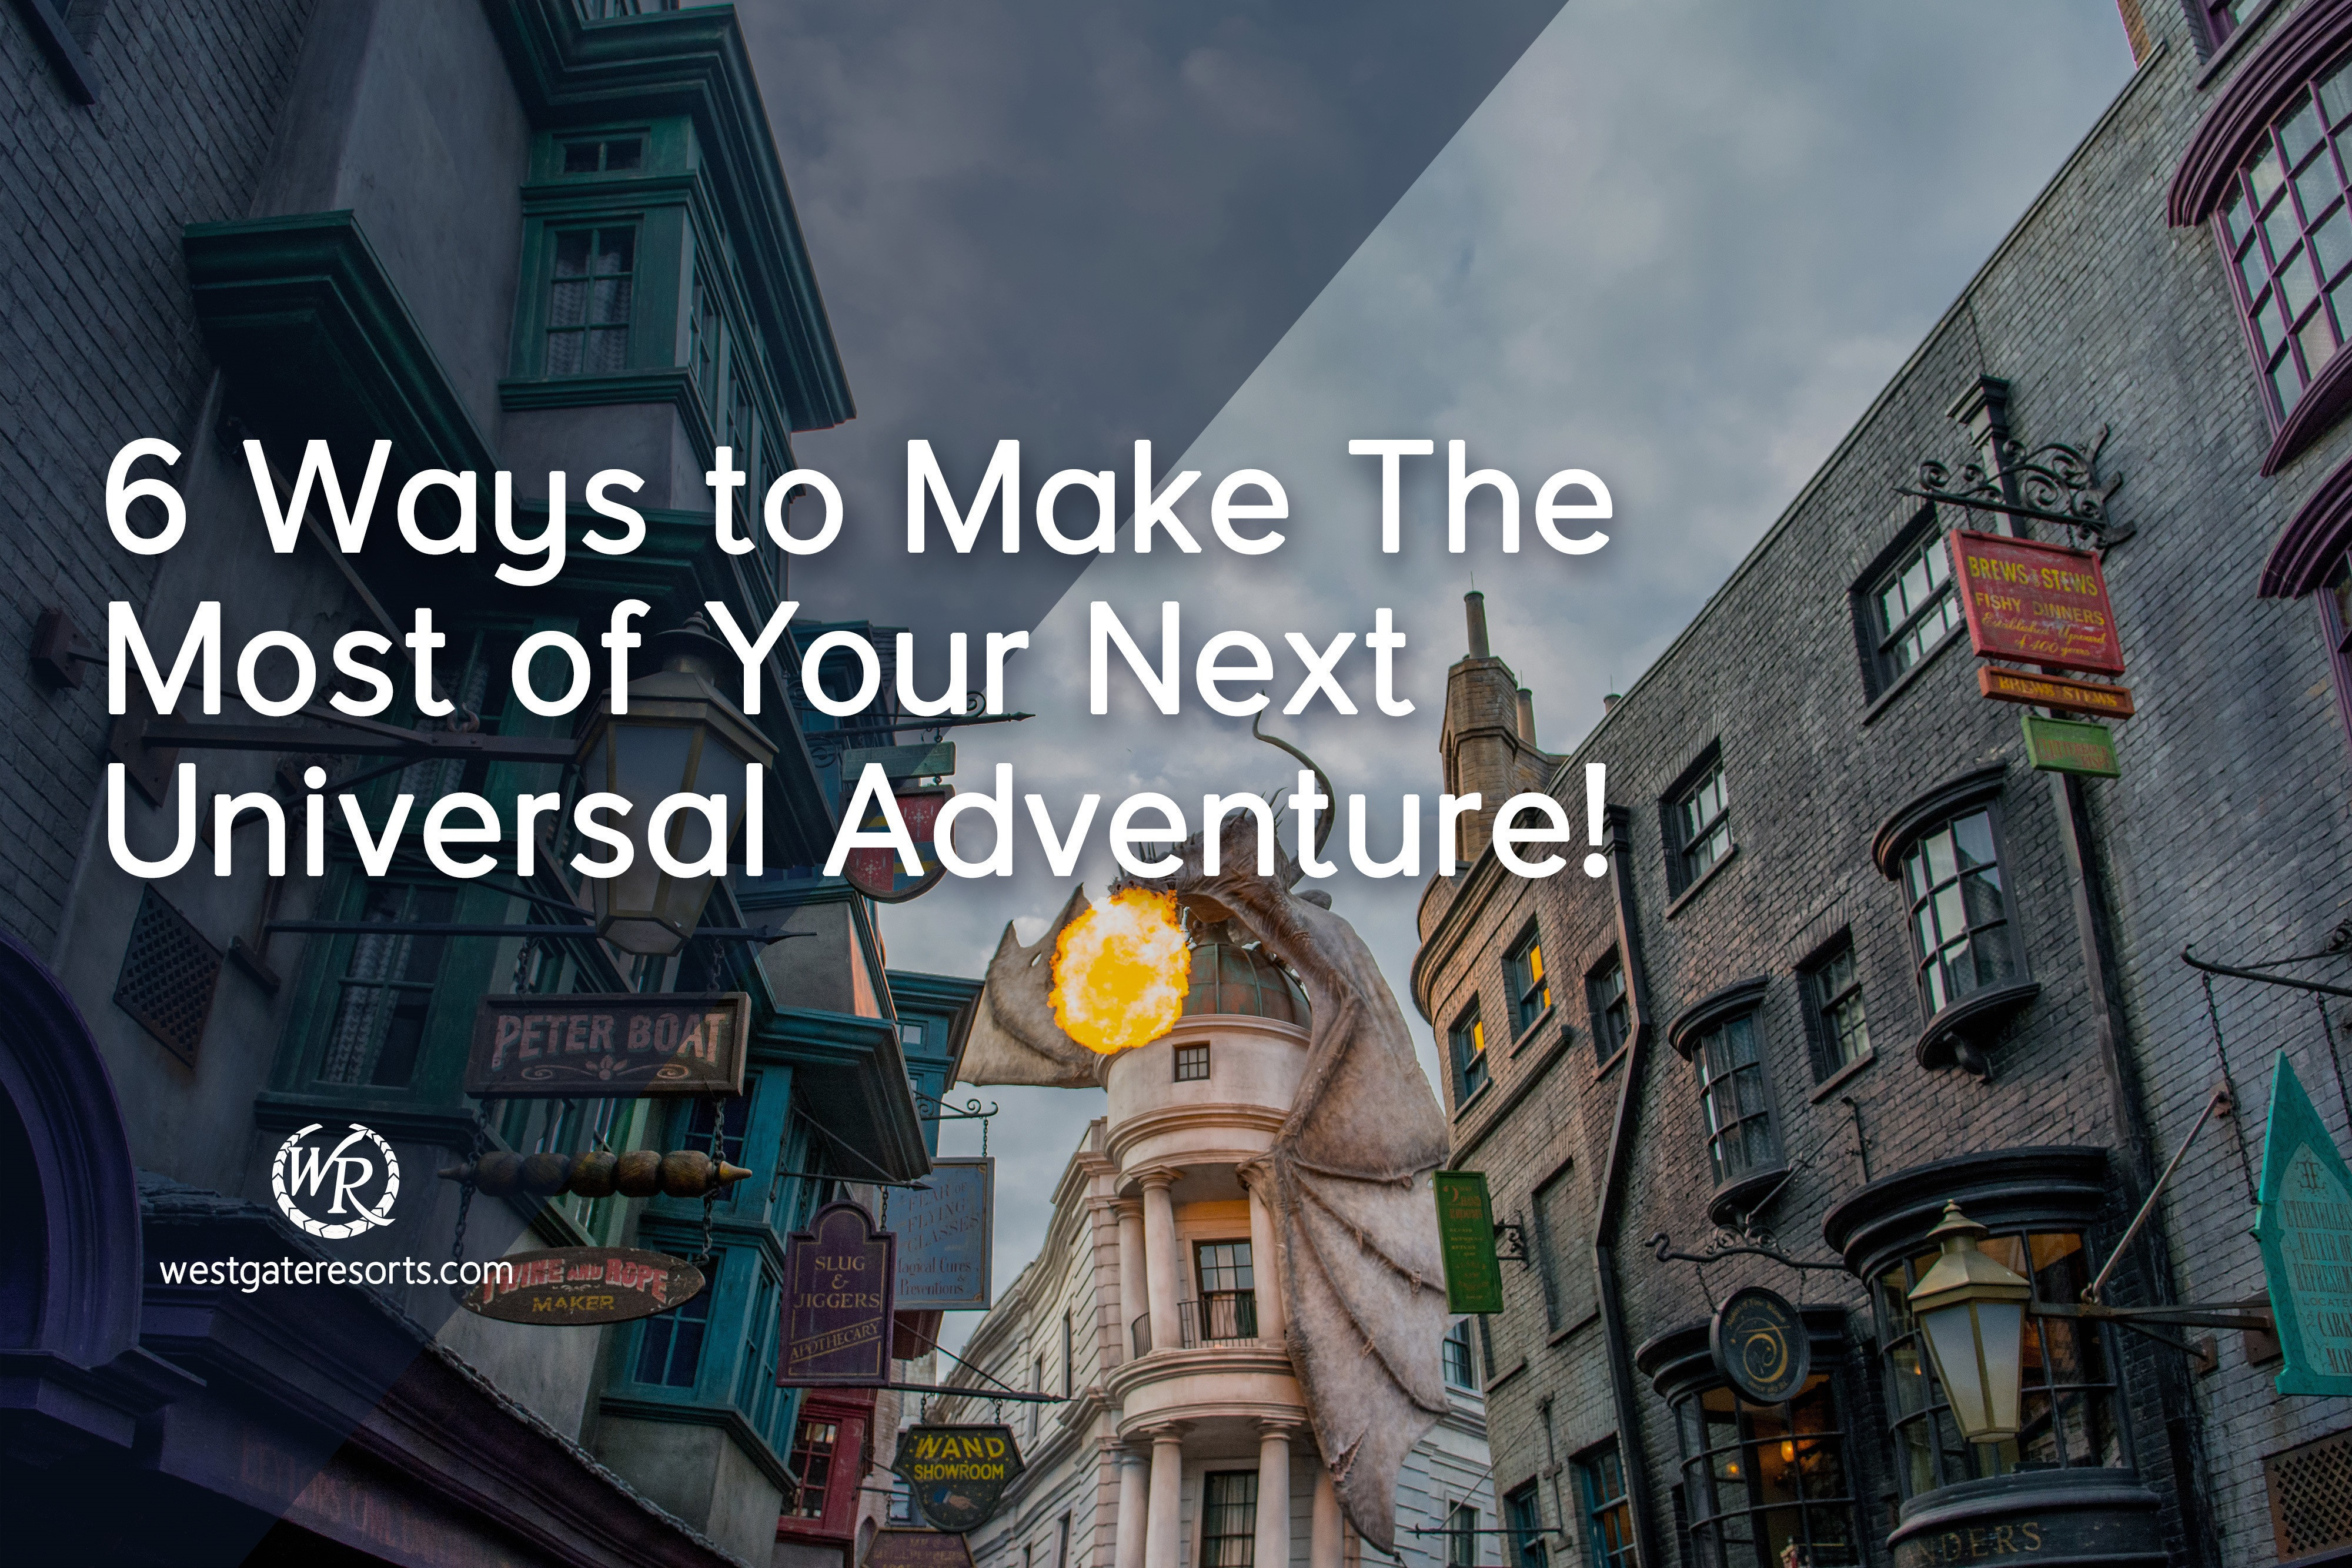 6 Ways to Make The Most of Your Next Universal Adventure!